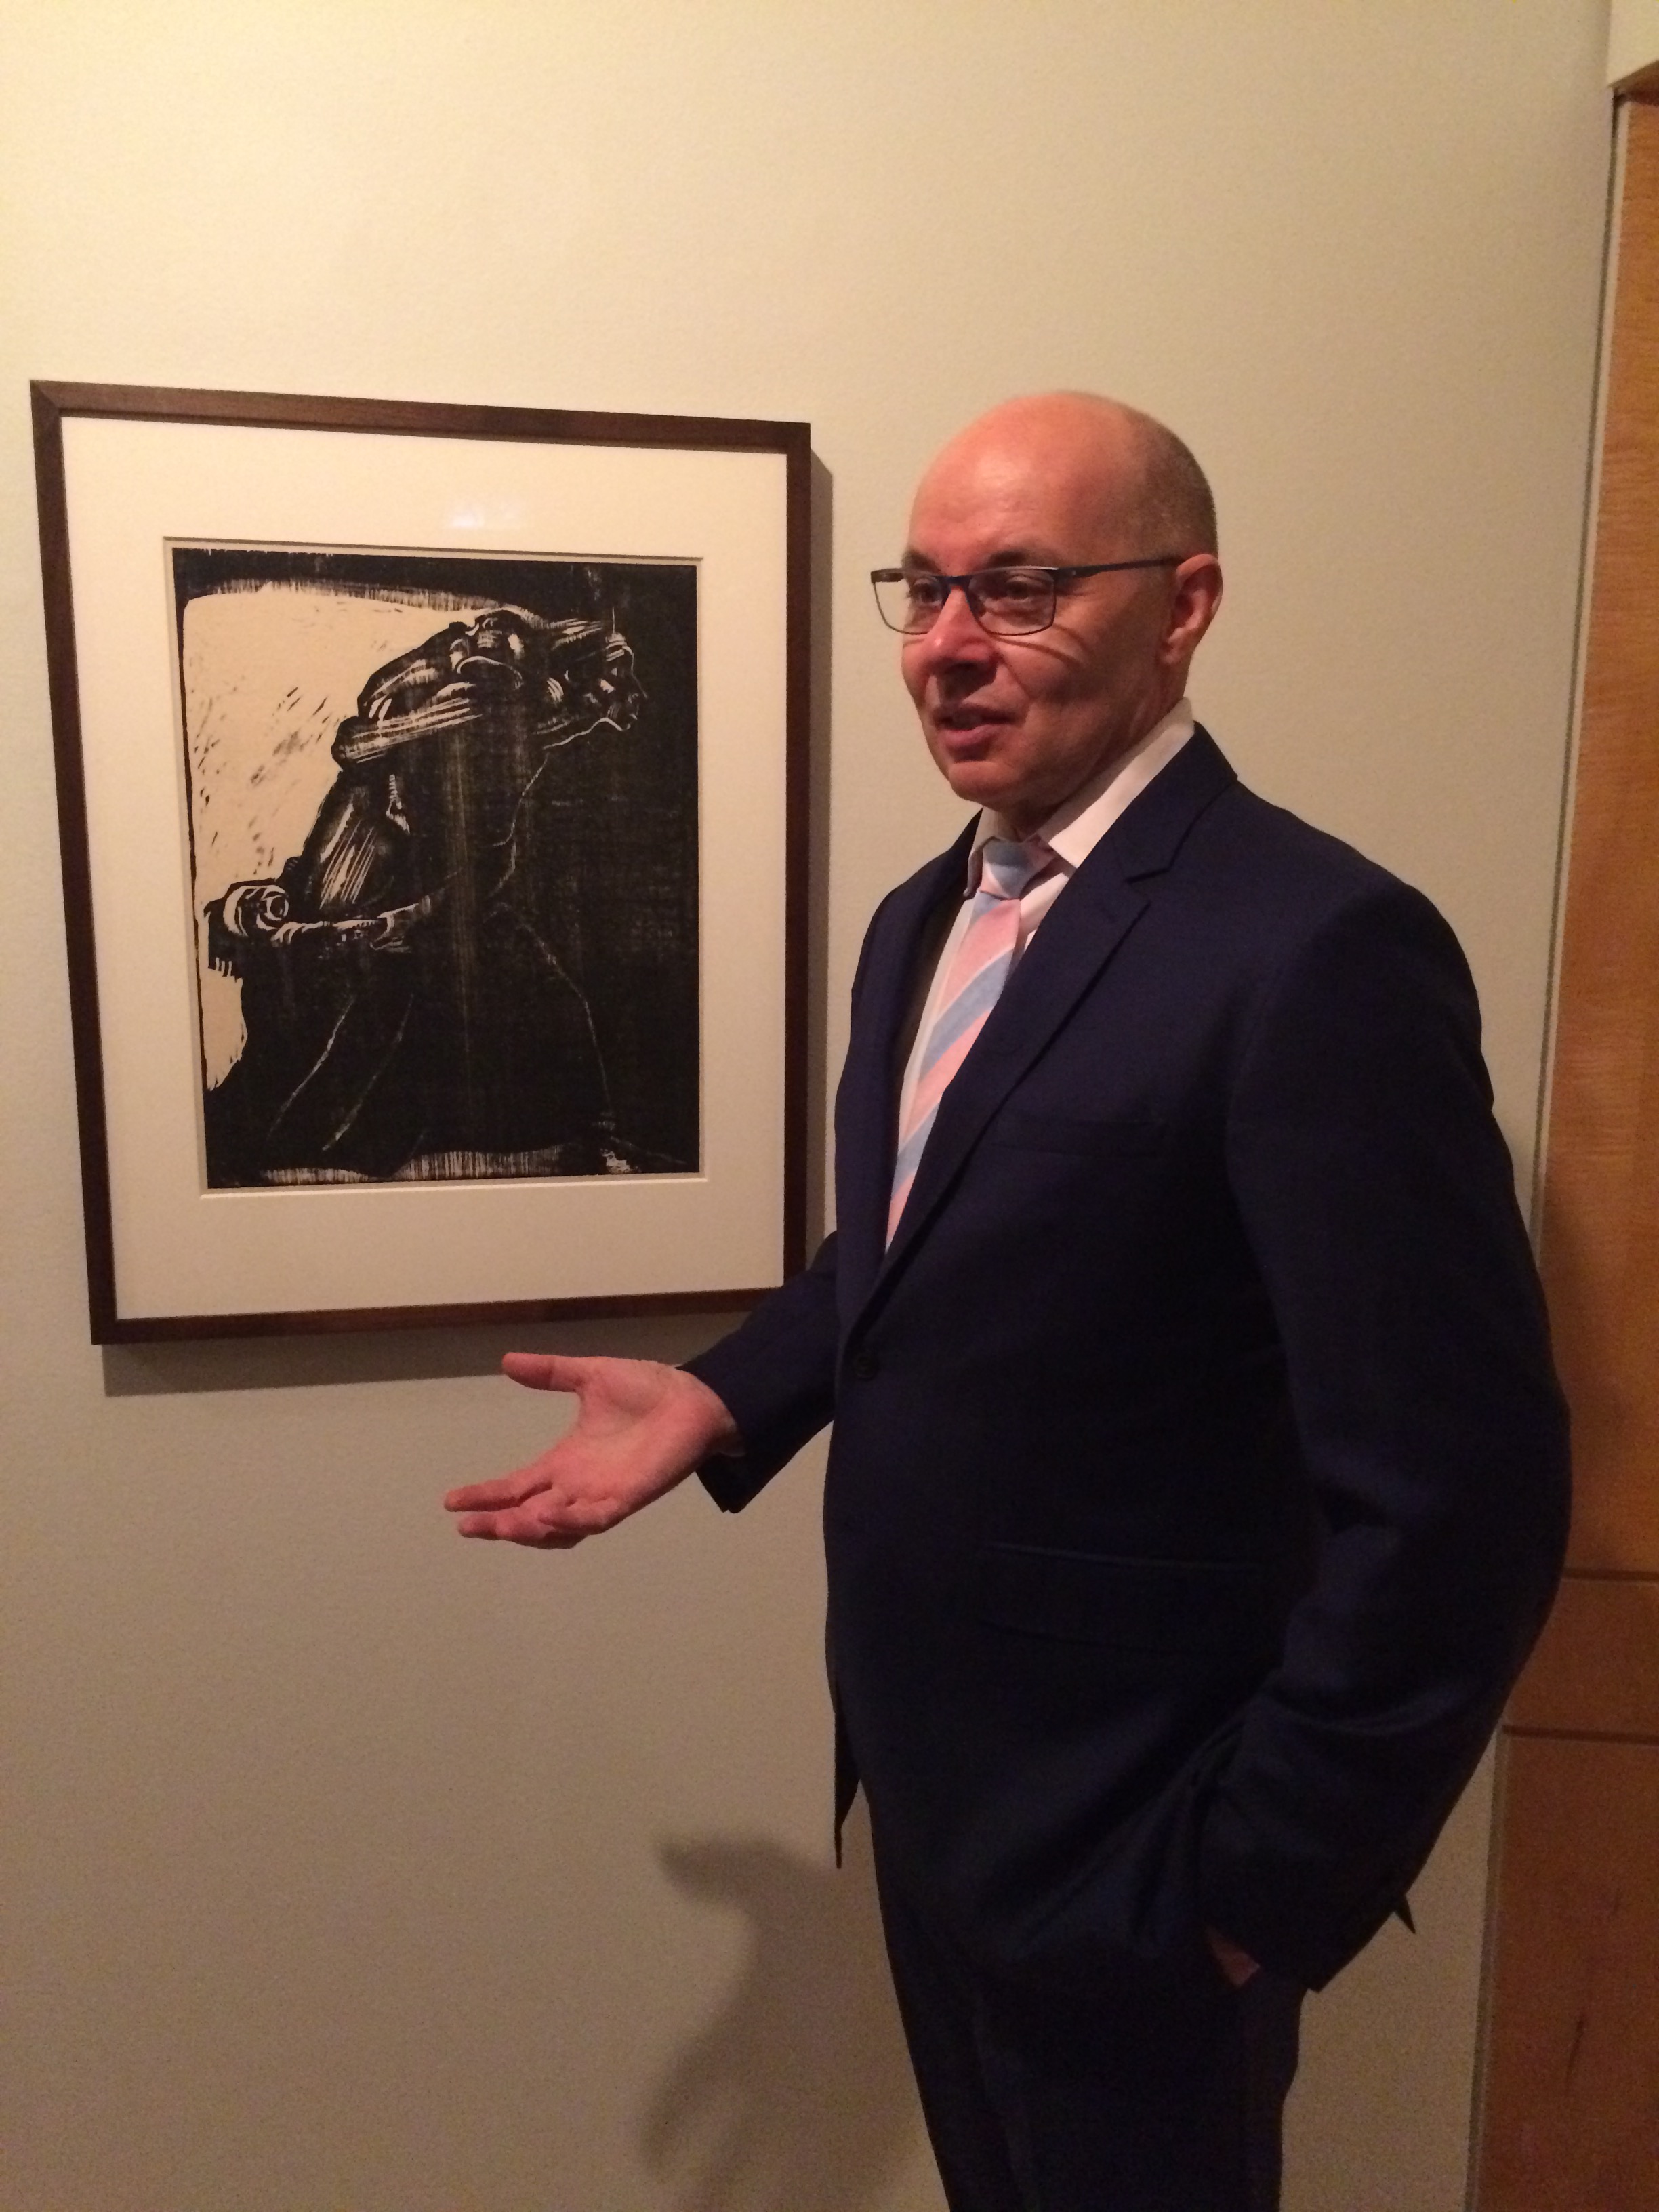 Dr. Brian McCrindle with Kathe Kollwitz work "Woman with Children Going to Their Death."